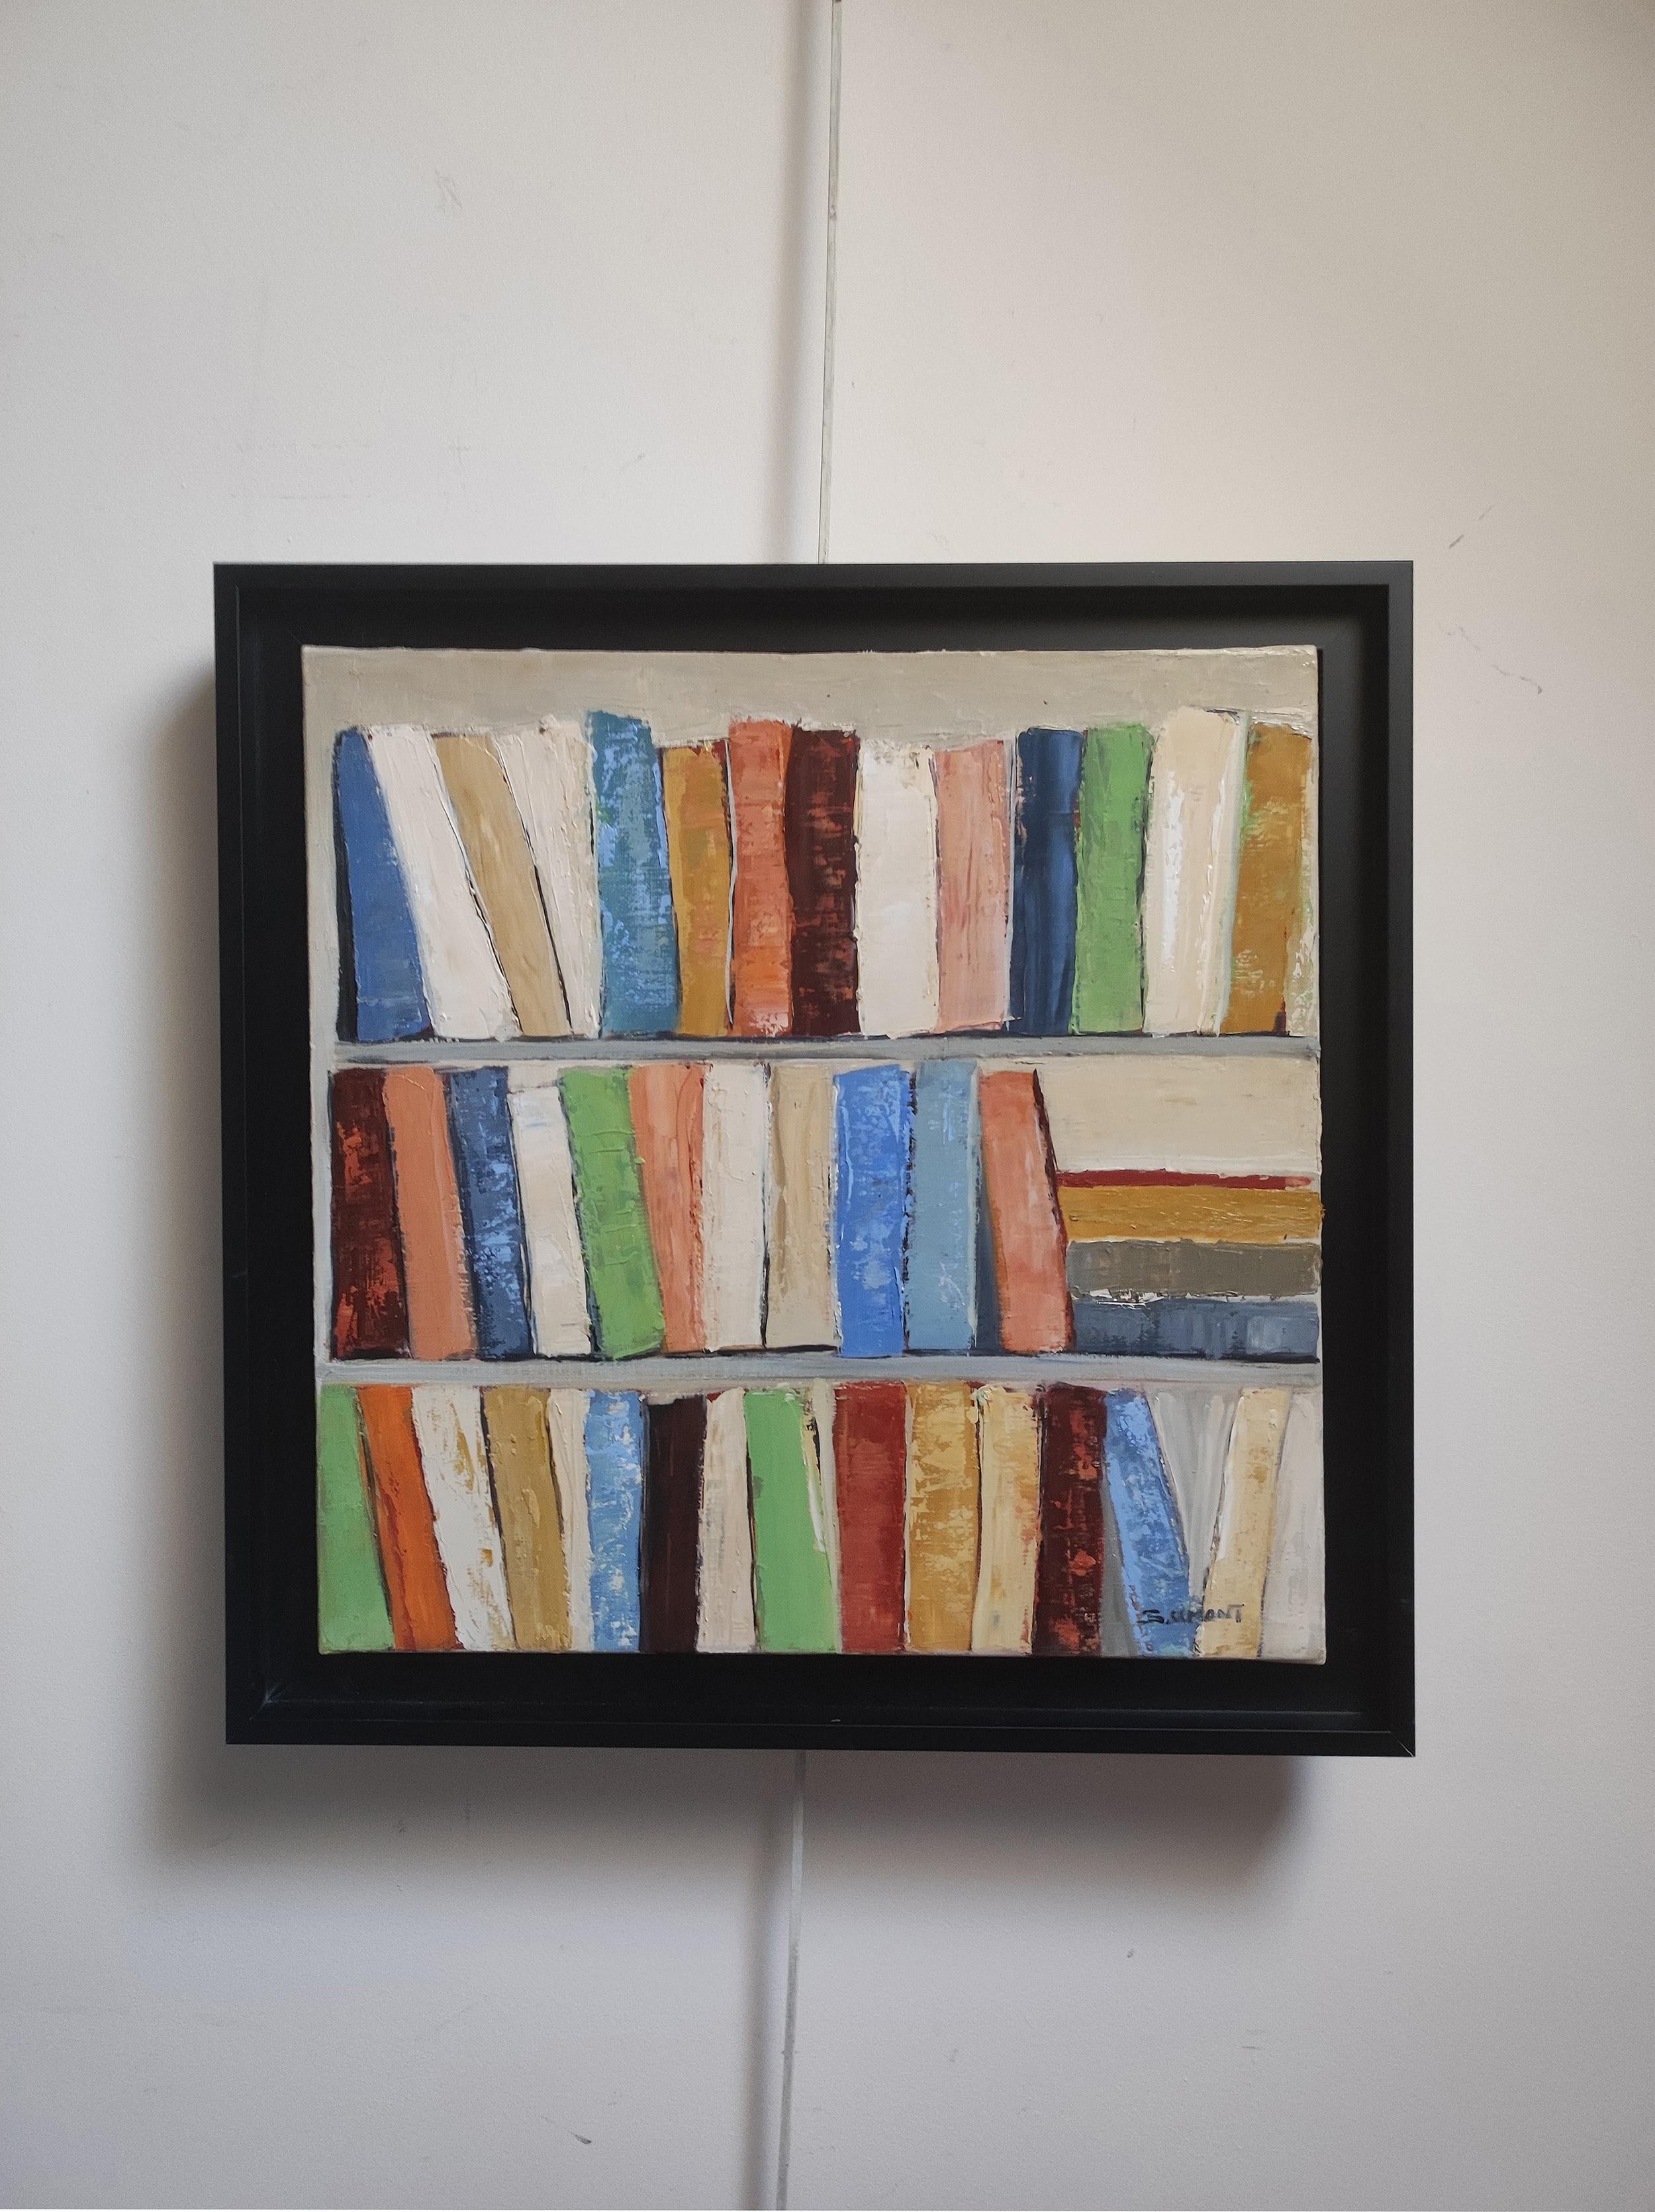 abstract representation of books on shelves. The painting is characterized by thick, visible brush strokes that add texture and depth to the image. The color palette is diverse, with each “book” painted in different hues including blues, greens,